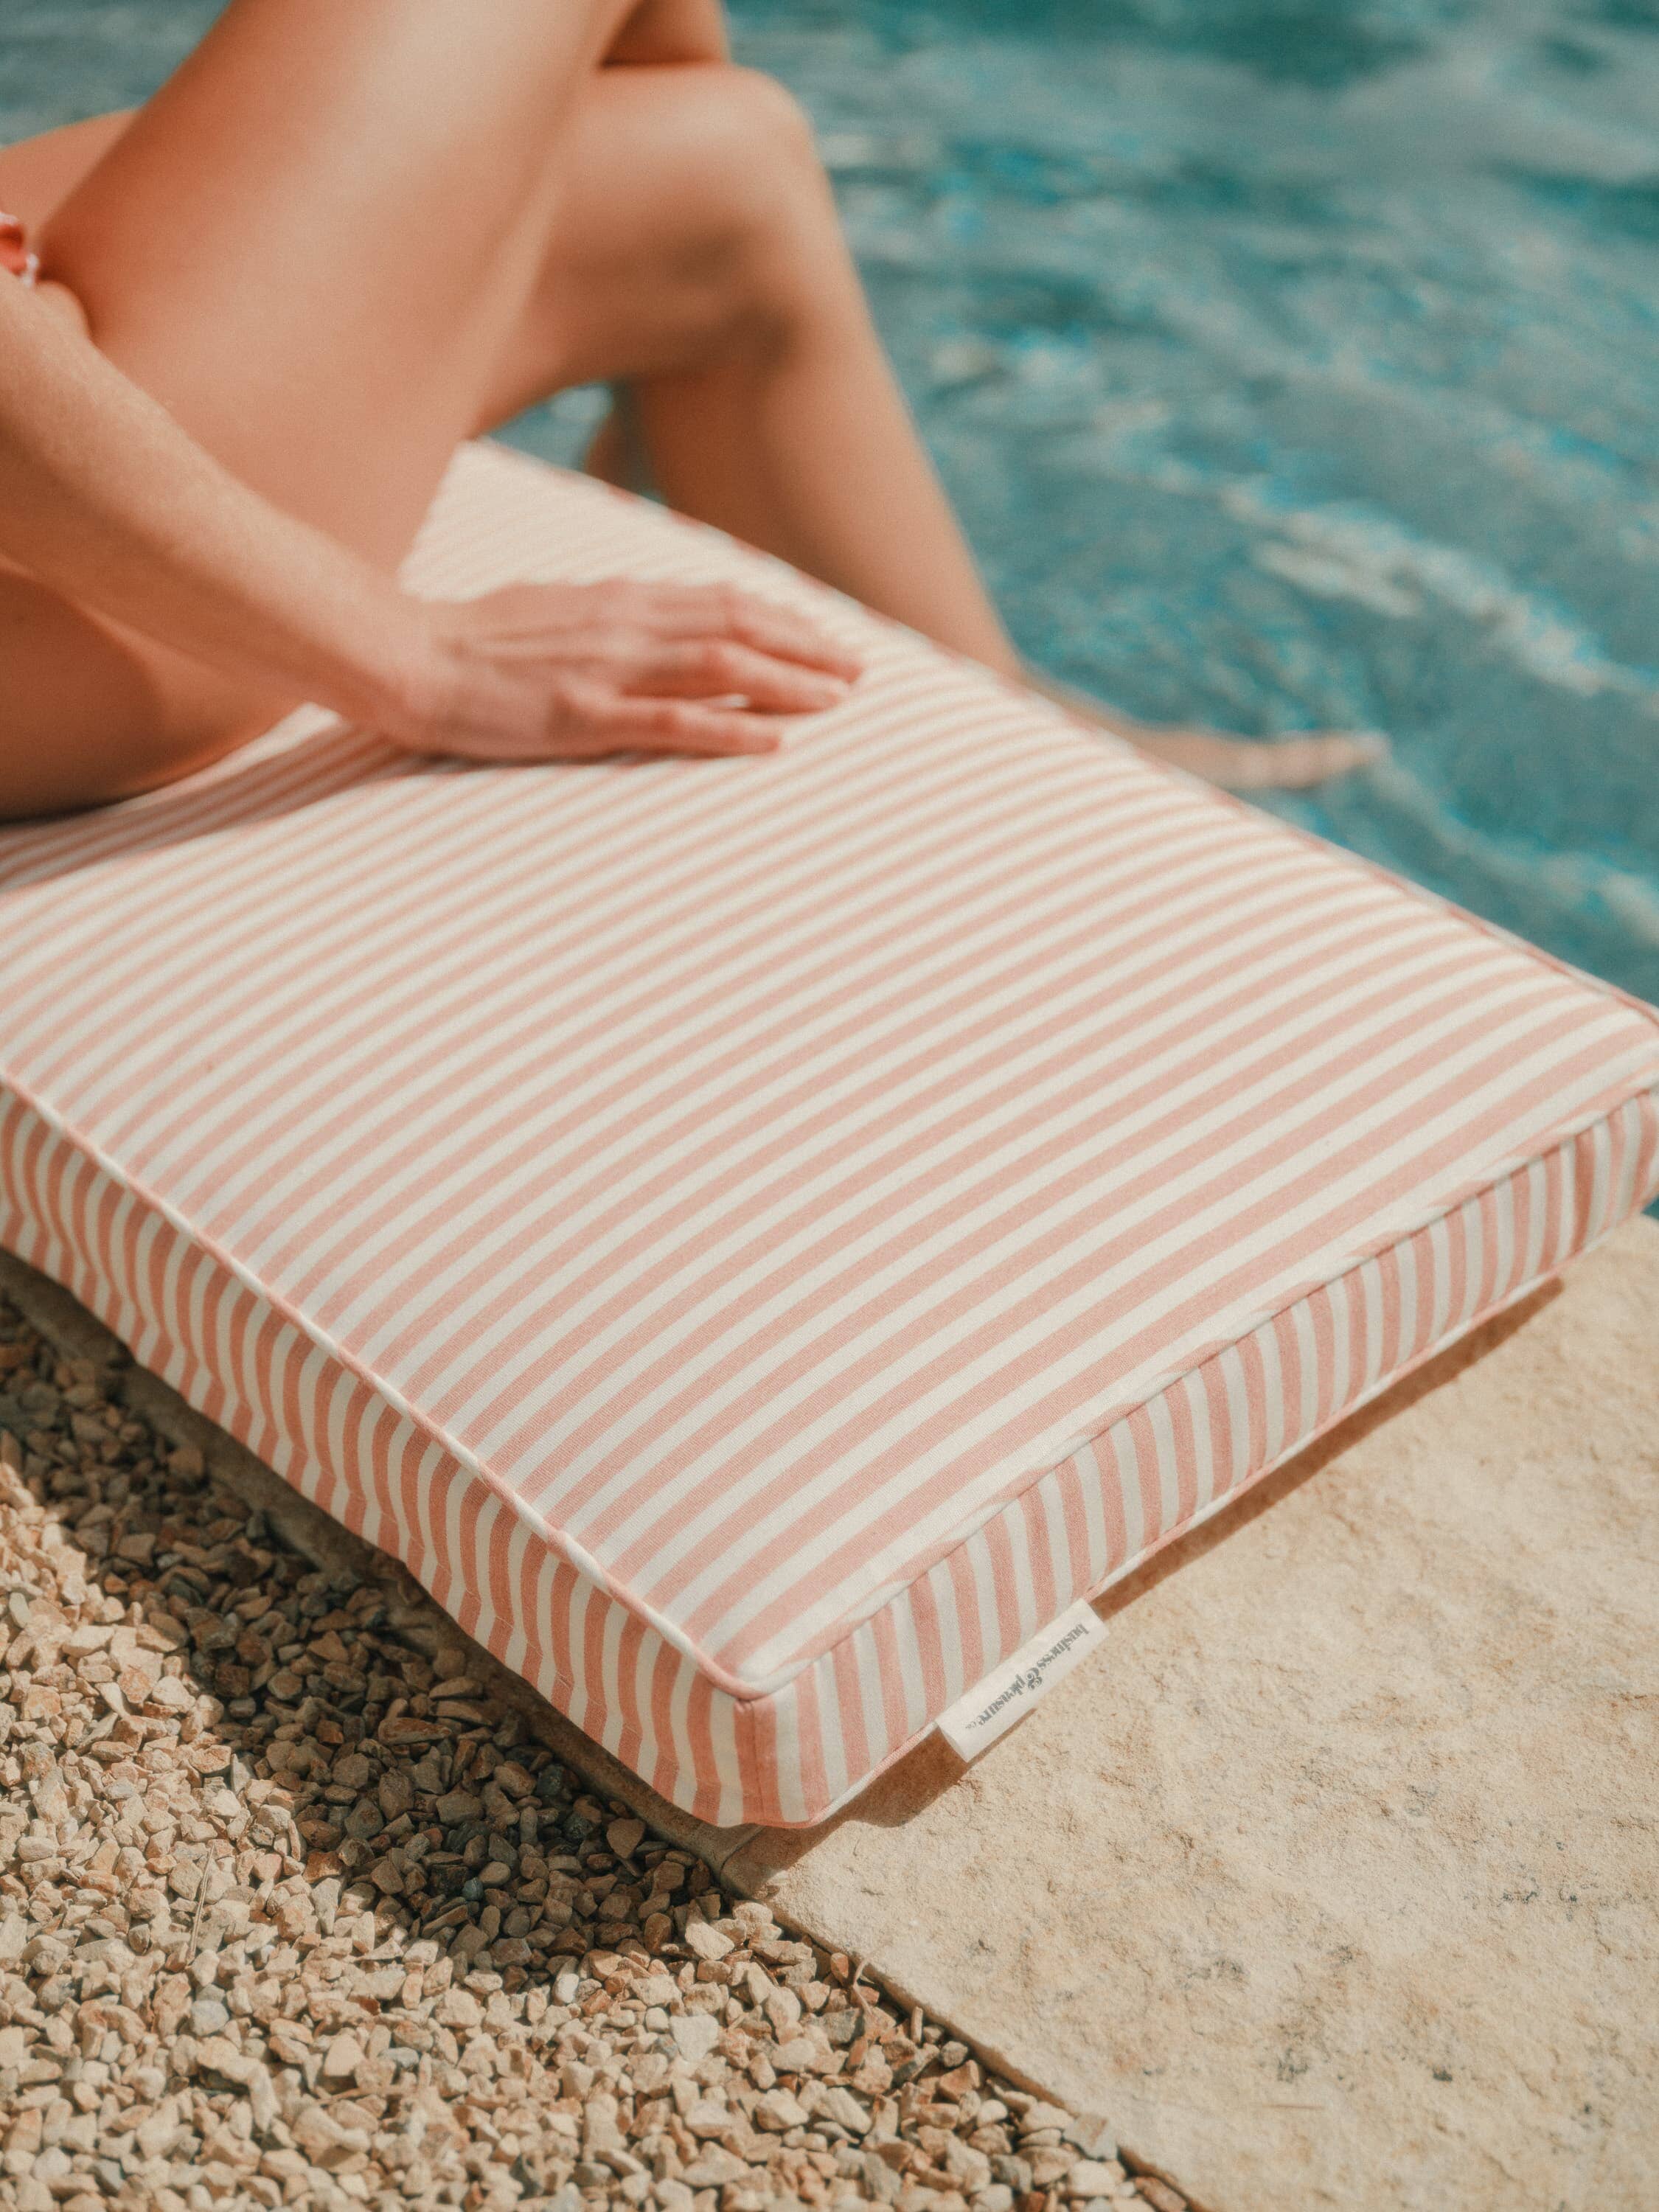 Person sitting on a bench pillow next to a pool